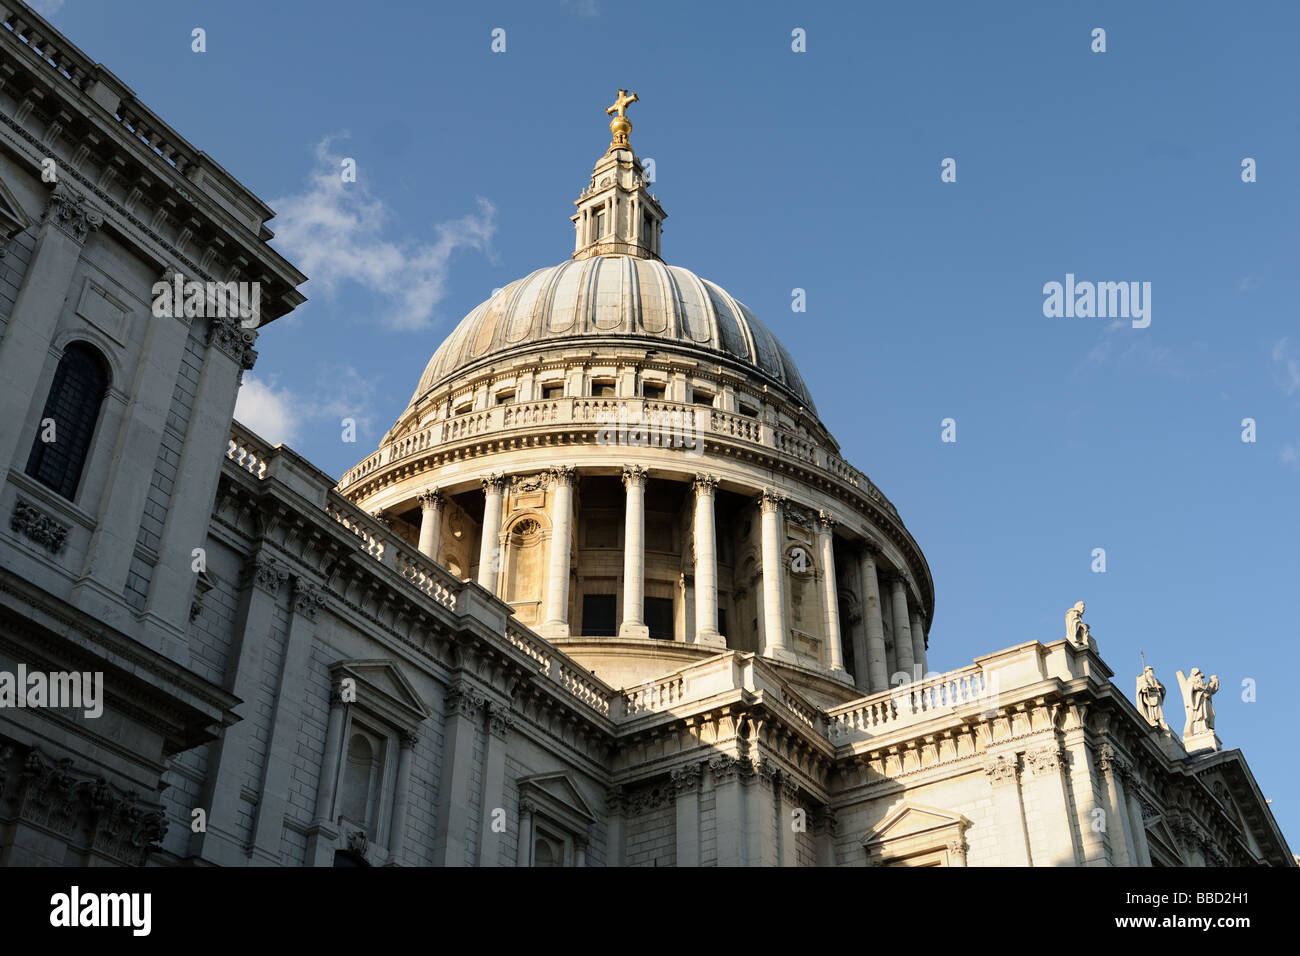 Iconic dome of St Paul s Cathedral City of London England UK one of the largest in the world in early evening light Stock Photo